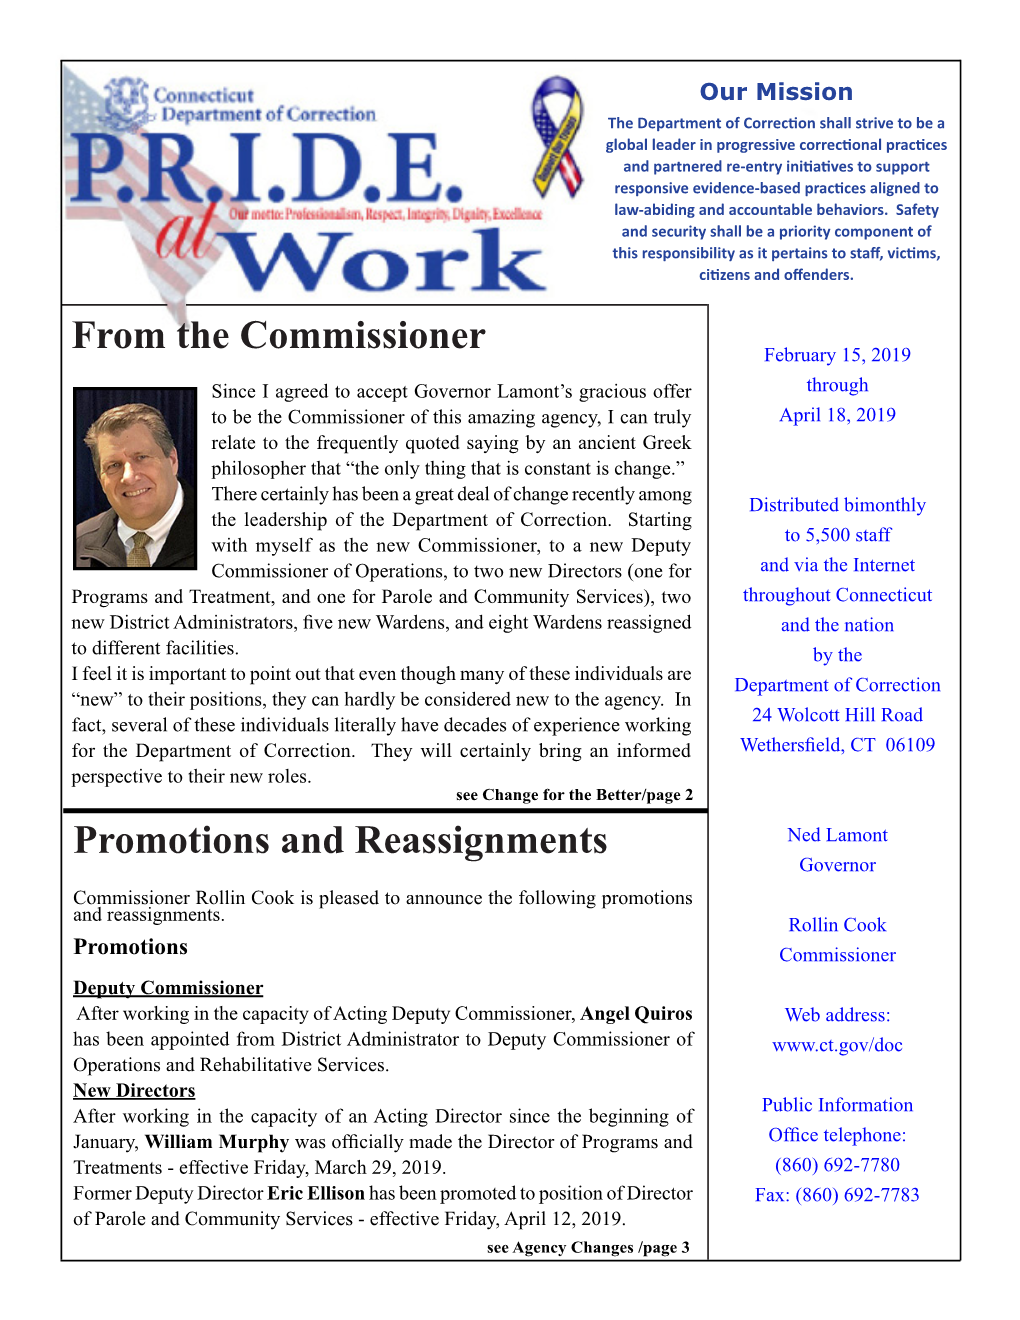 Promotions and Reassignments from the Commissioner